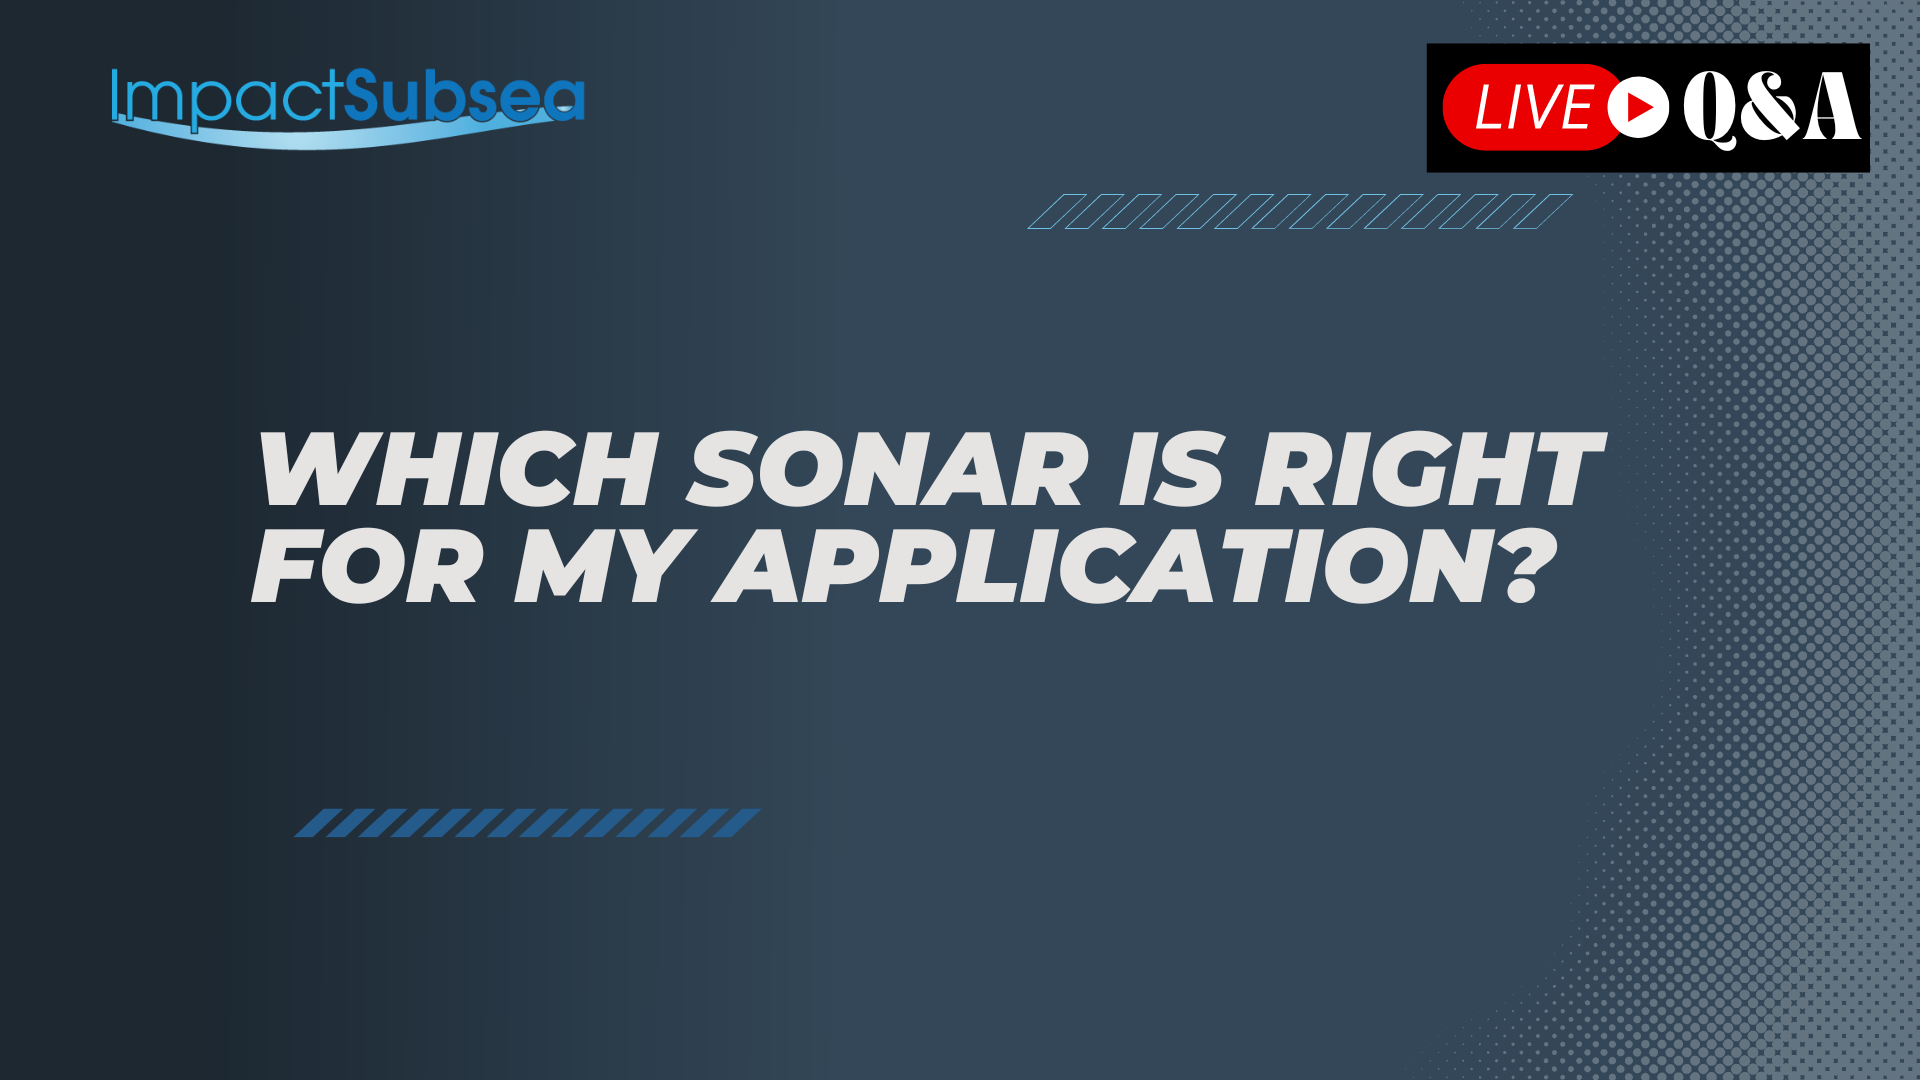 Which sonar is right for my application